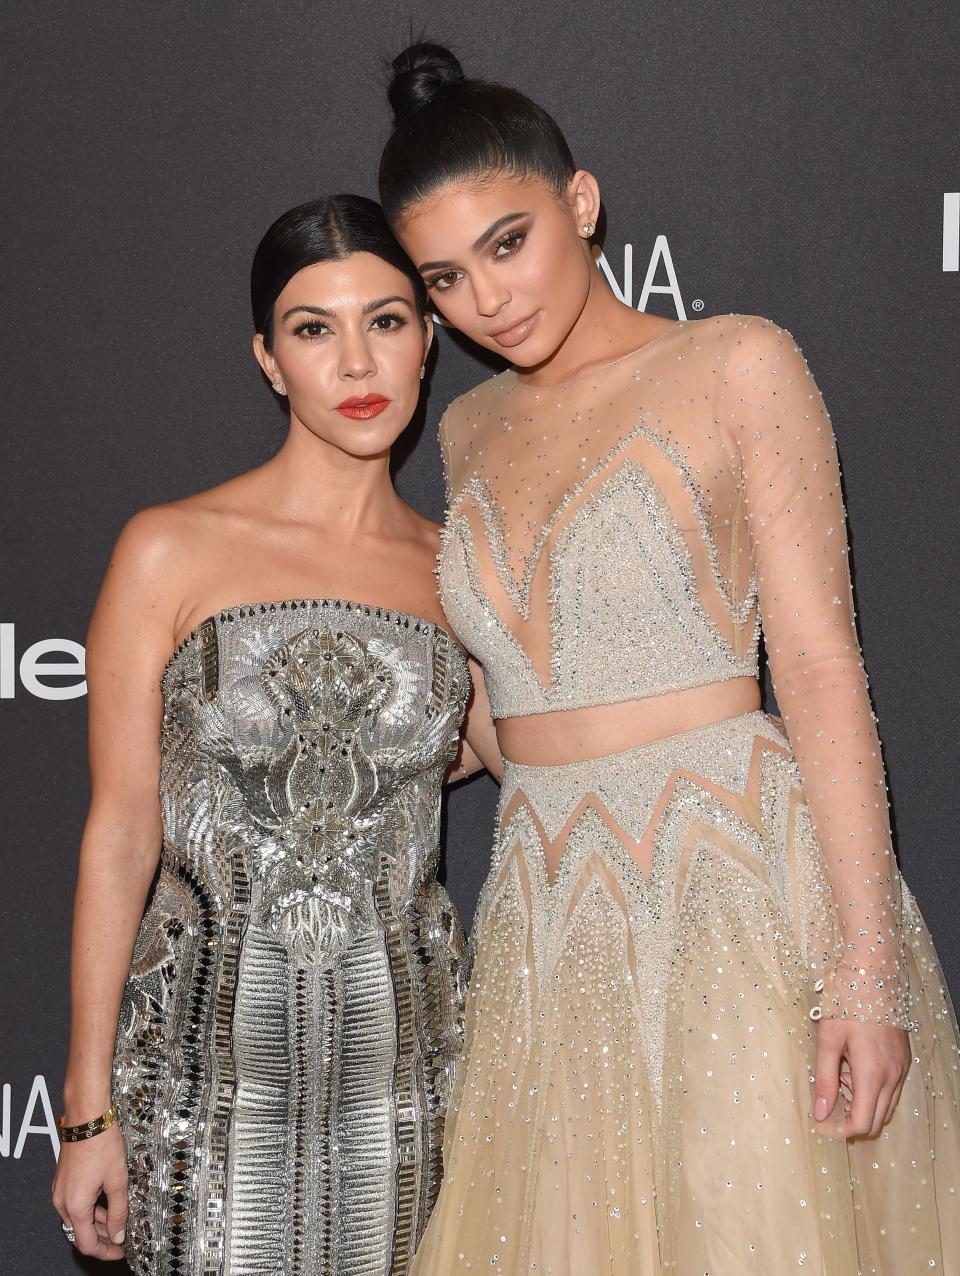 Kylie Jenner revealed on Snapchat the first look at the Kylie Cosmetics collection she collaborated with her sister Kourtney Kardashian on called Kourt.